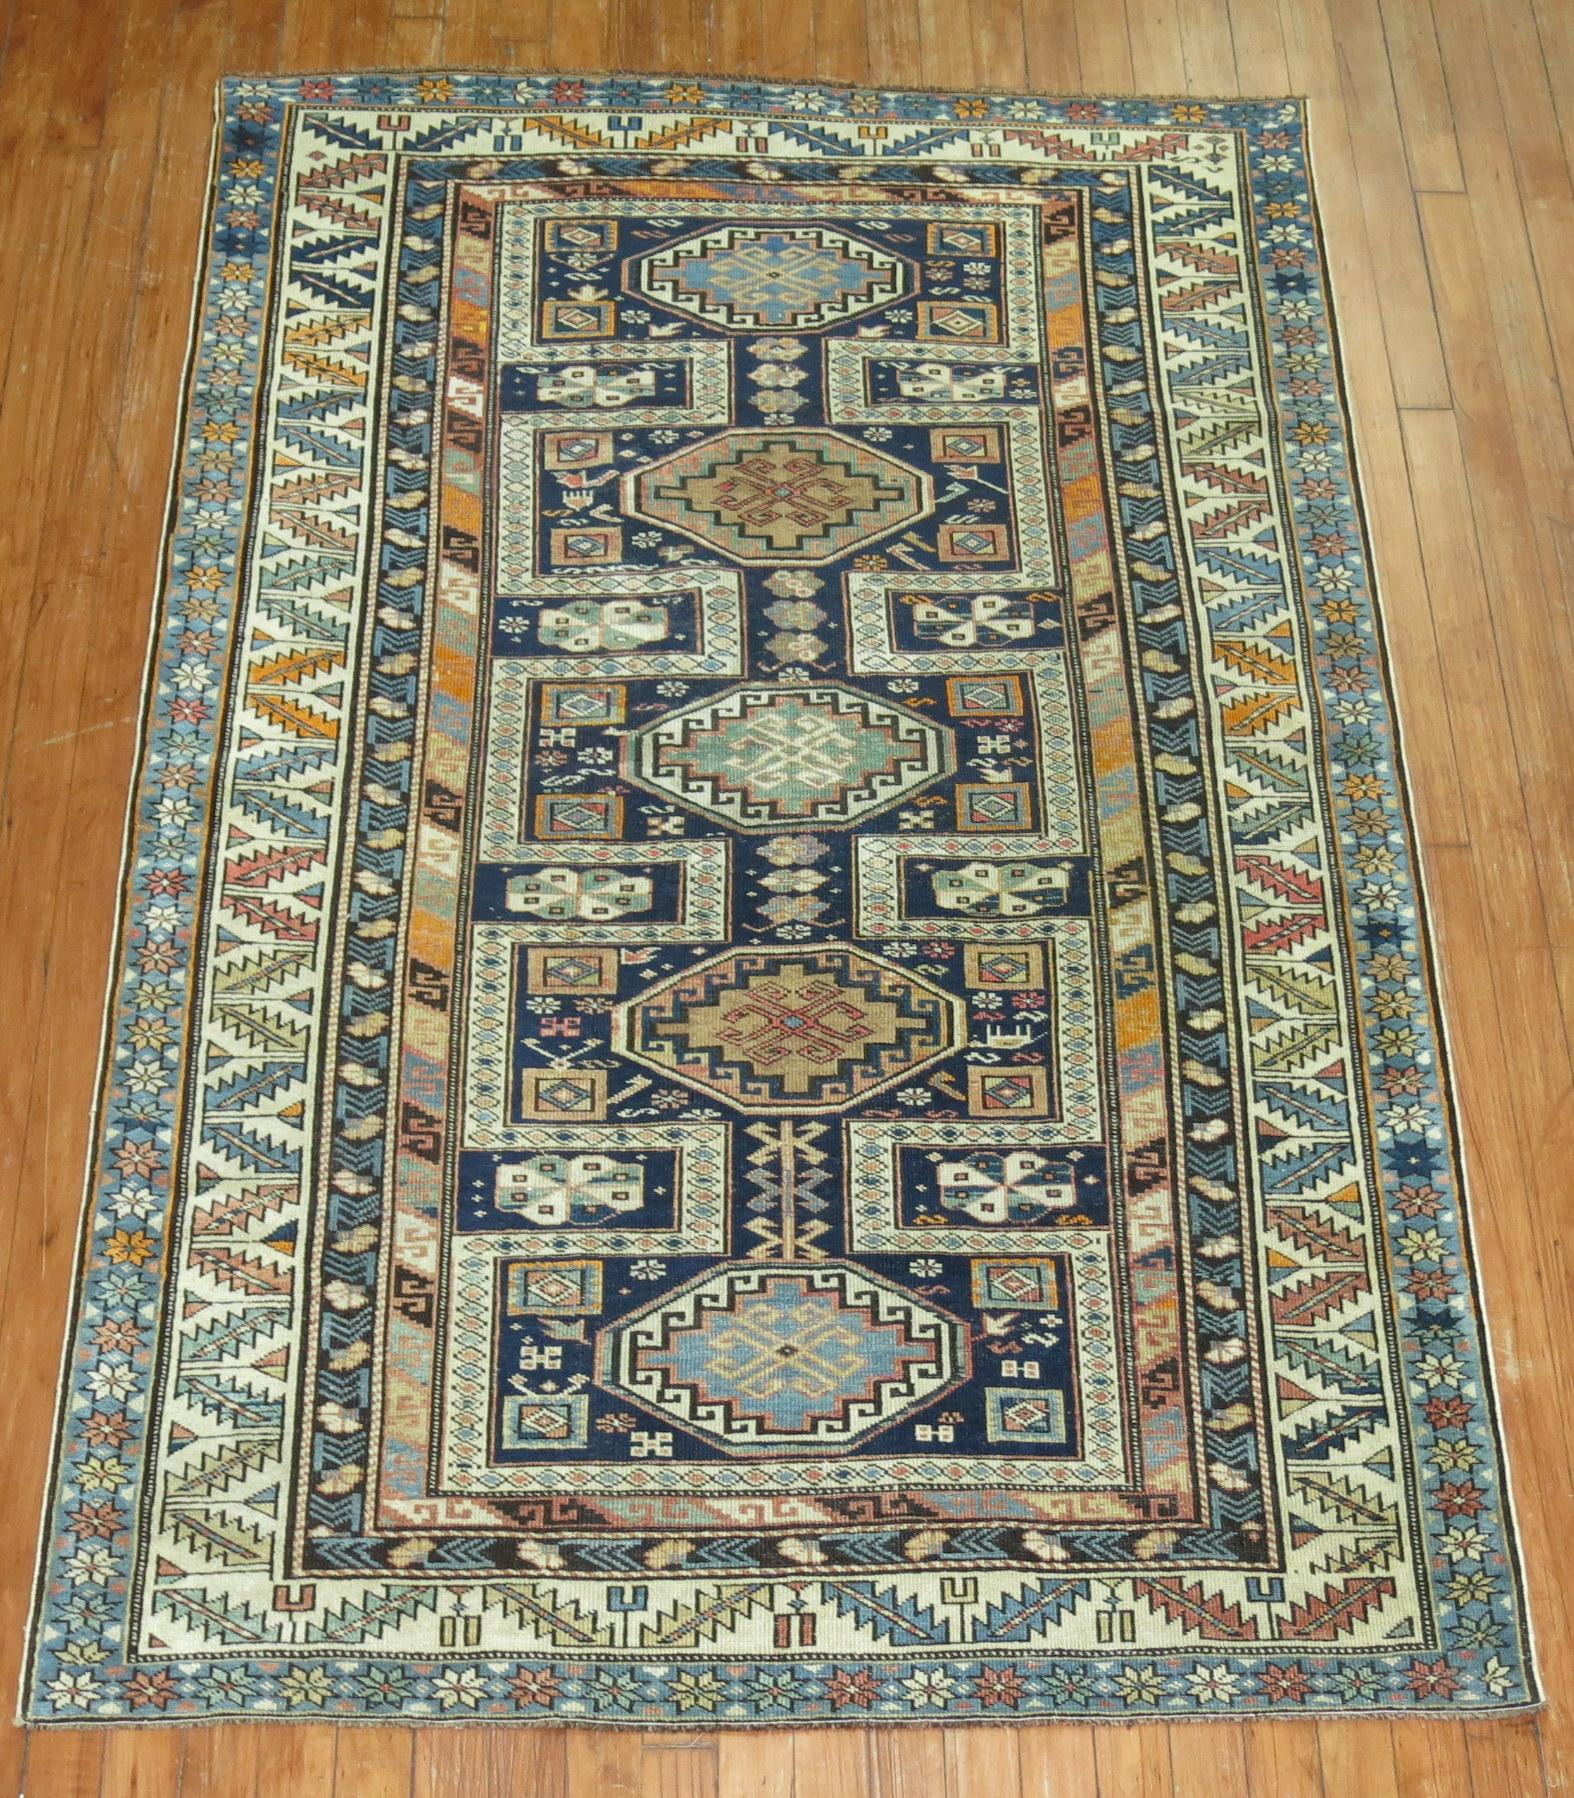 A geometric tribal looking Caucasian shirvan rug from the early 20th century

Antique Caucasian rugs from the Shirvan district village are still considered one of the best decorative and collector type of rugs from that the Caucasian